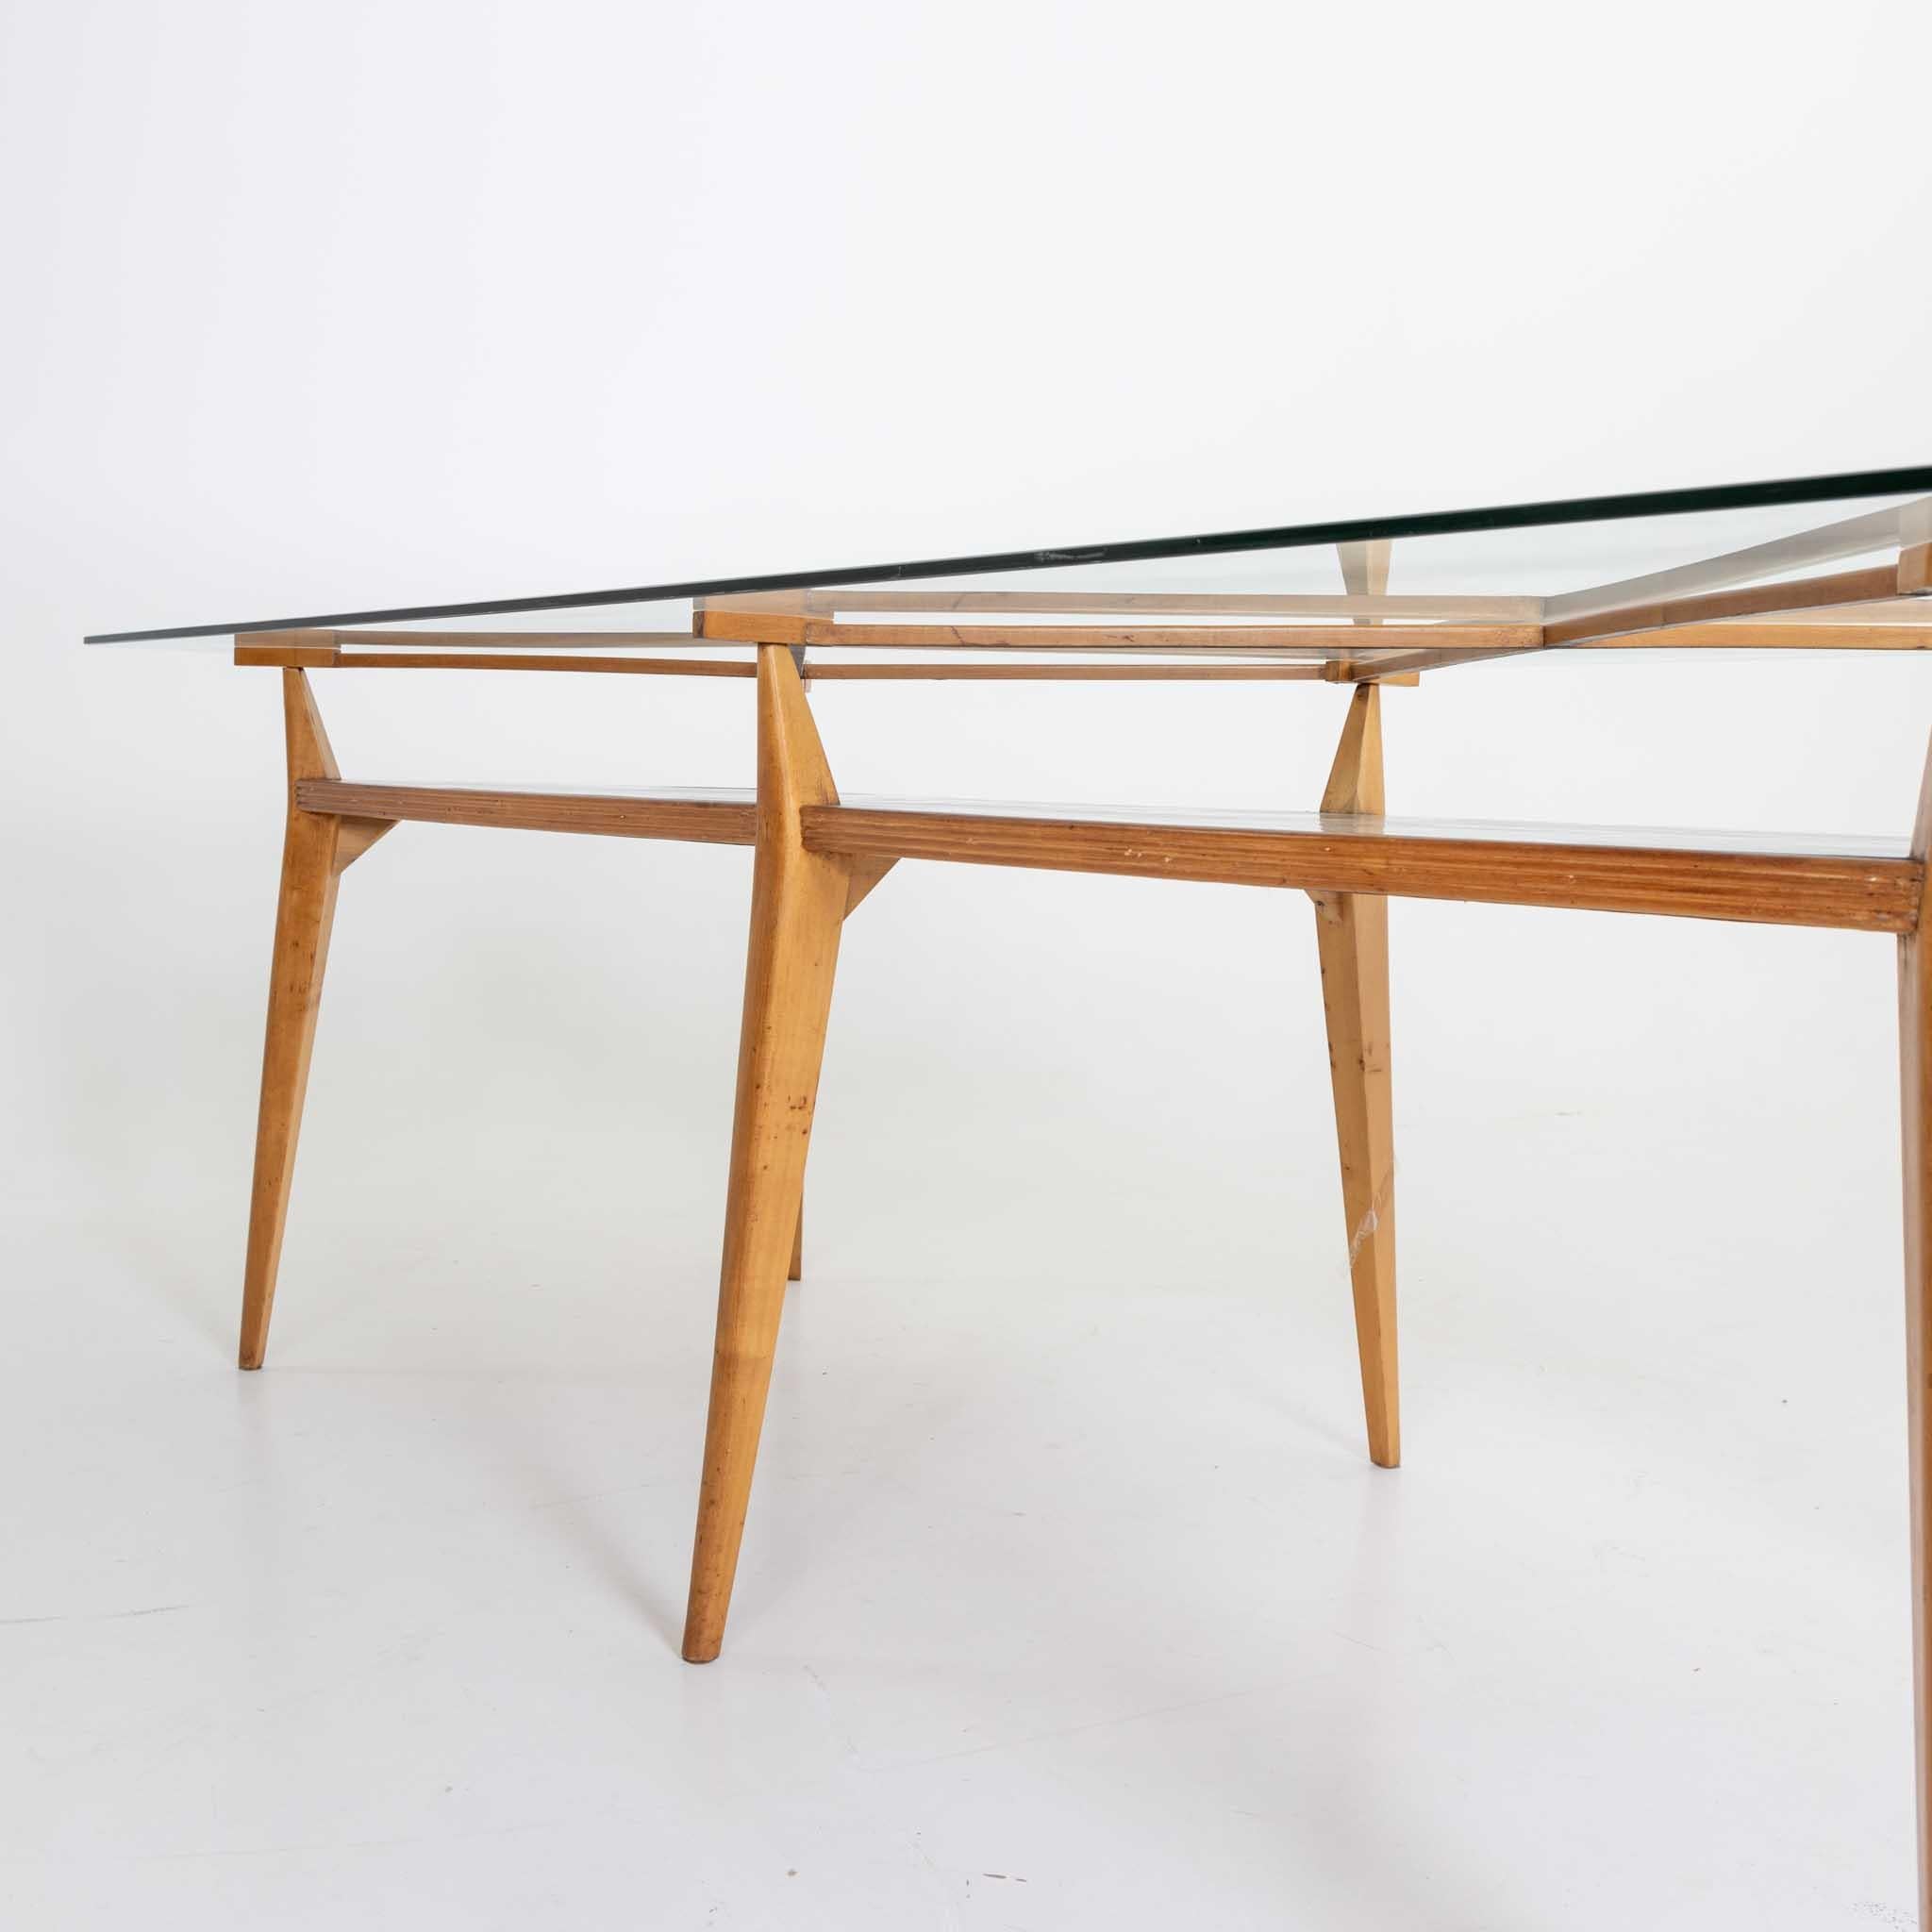 Wood Studio Table, designed by Vittorio Armellini, Italy Mid-20th Century For Sale